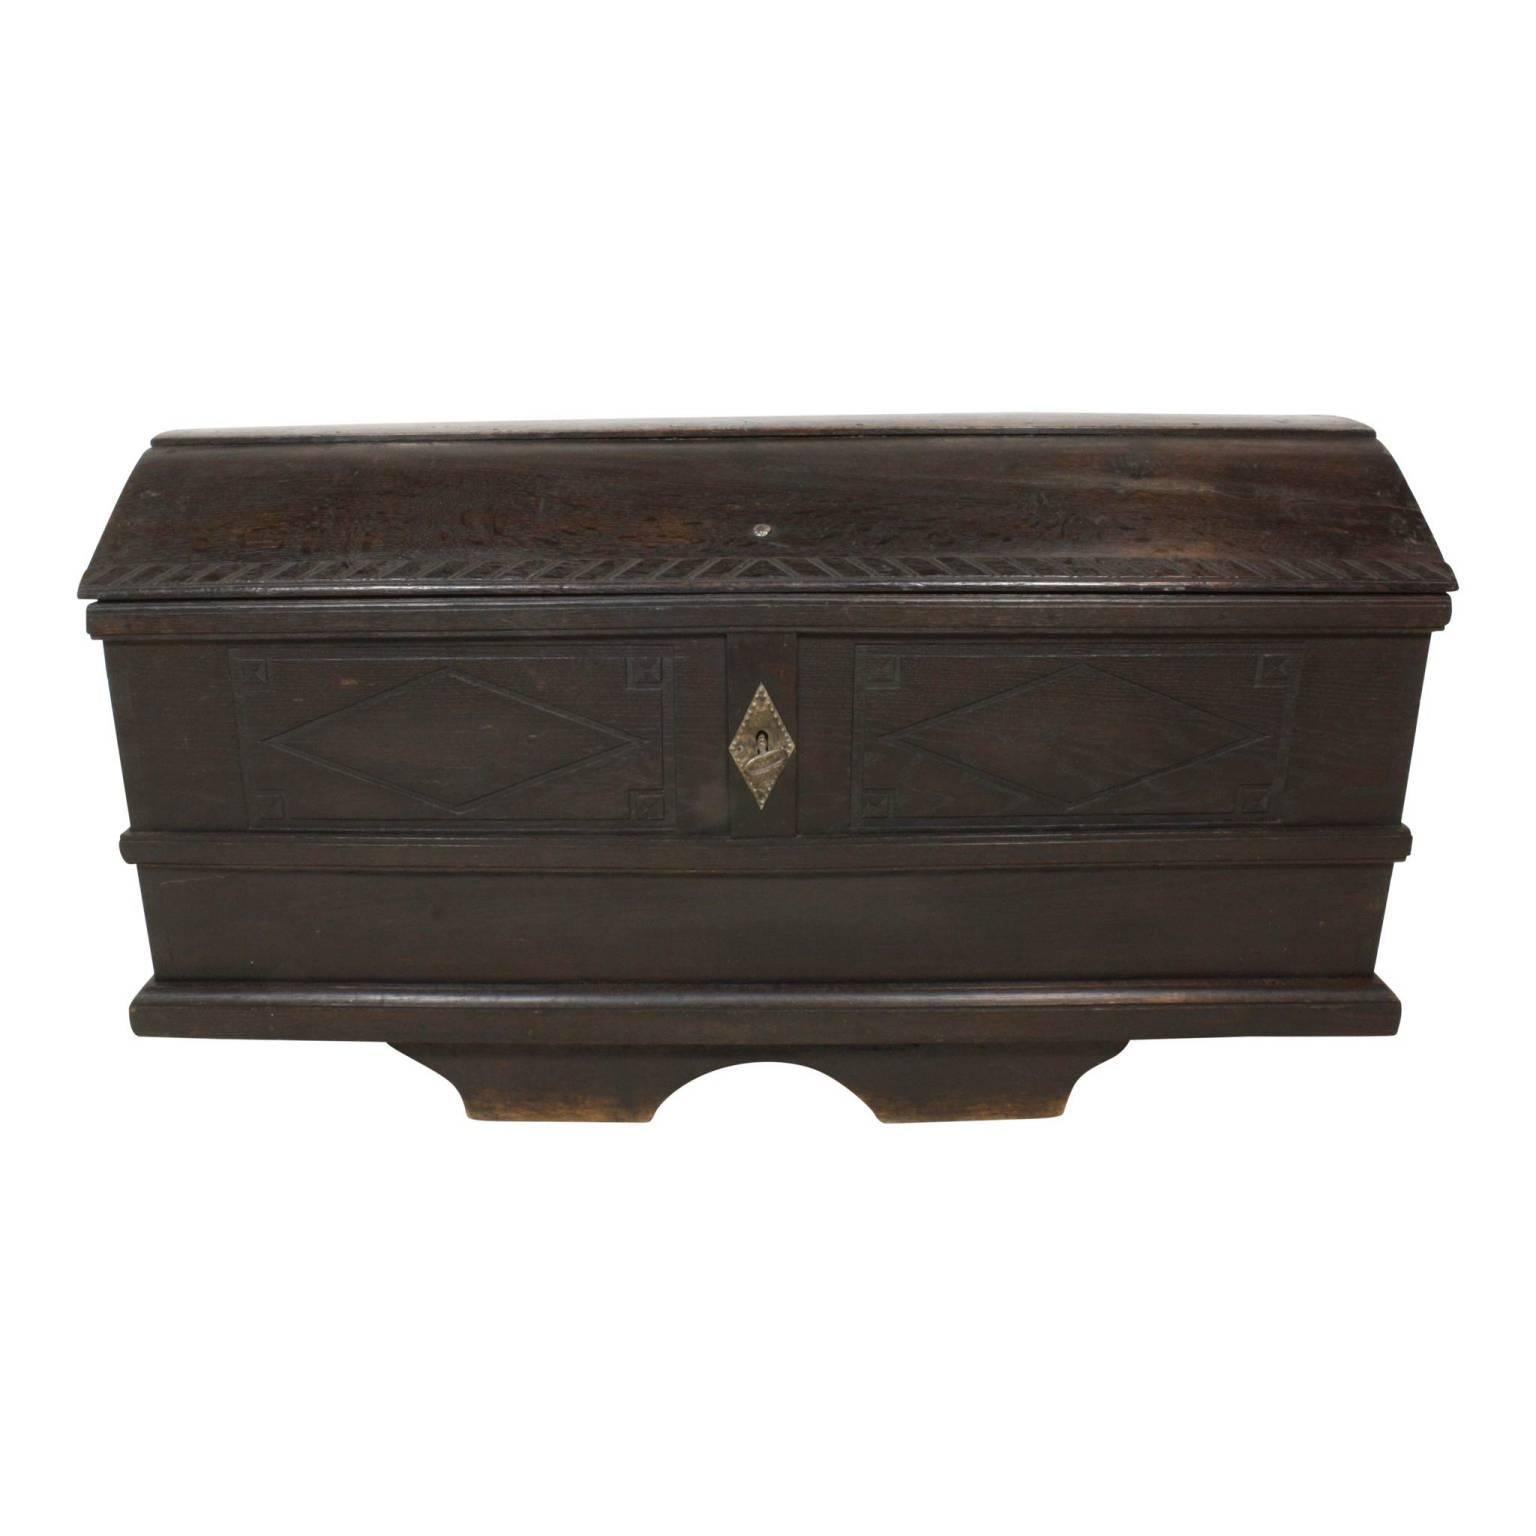 Unique centered feet make up the base of this piece that features the original hinges and handles. The beautiful interior patina and interior decorative hinges help make this piece look equally good open or closed.